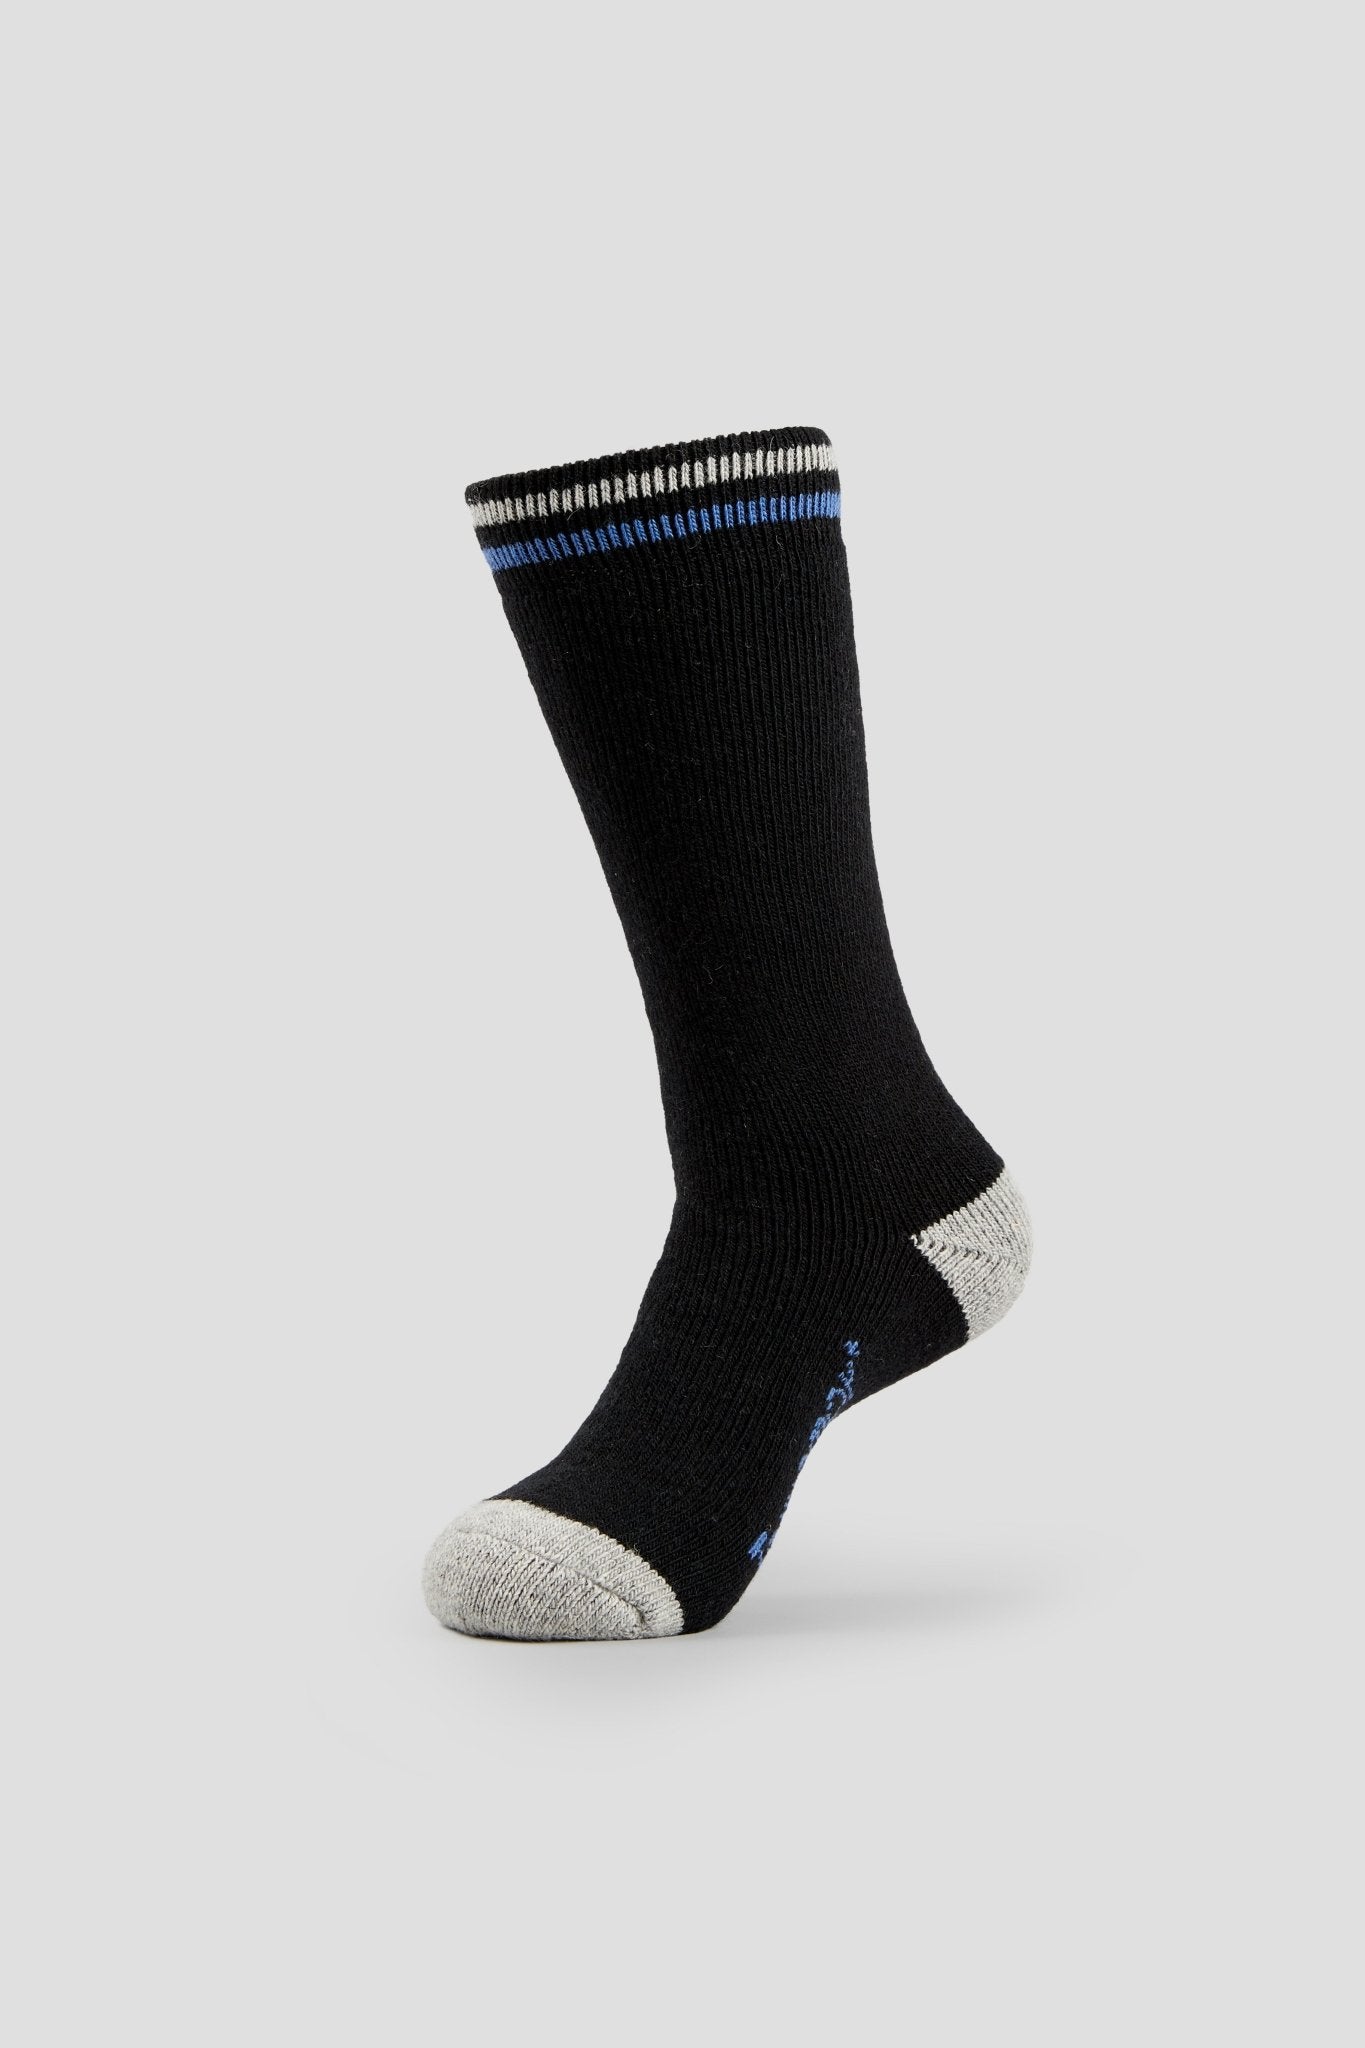 Thermawool® Sub-Zero Cold Weather Socks (2 Pairs) | Color: Black